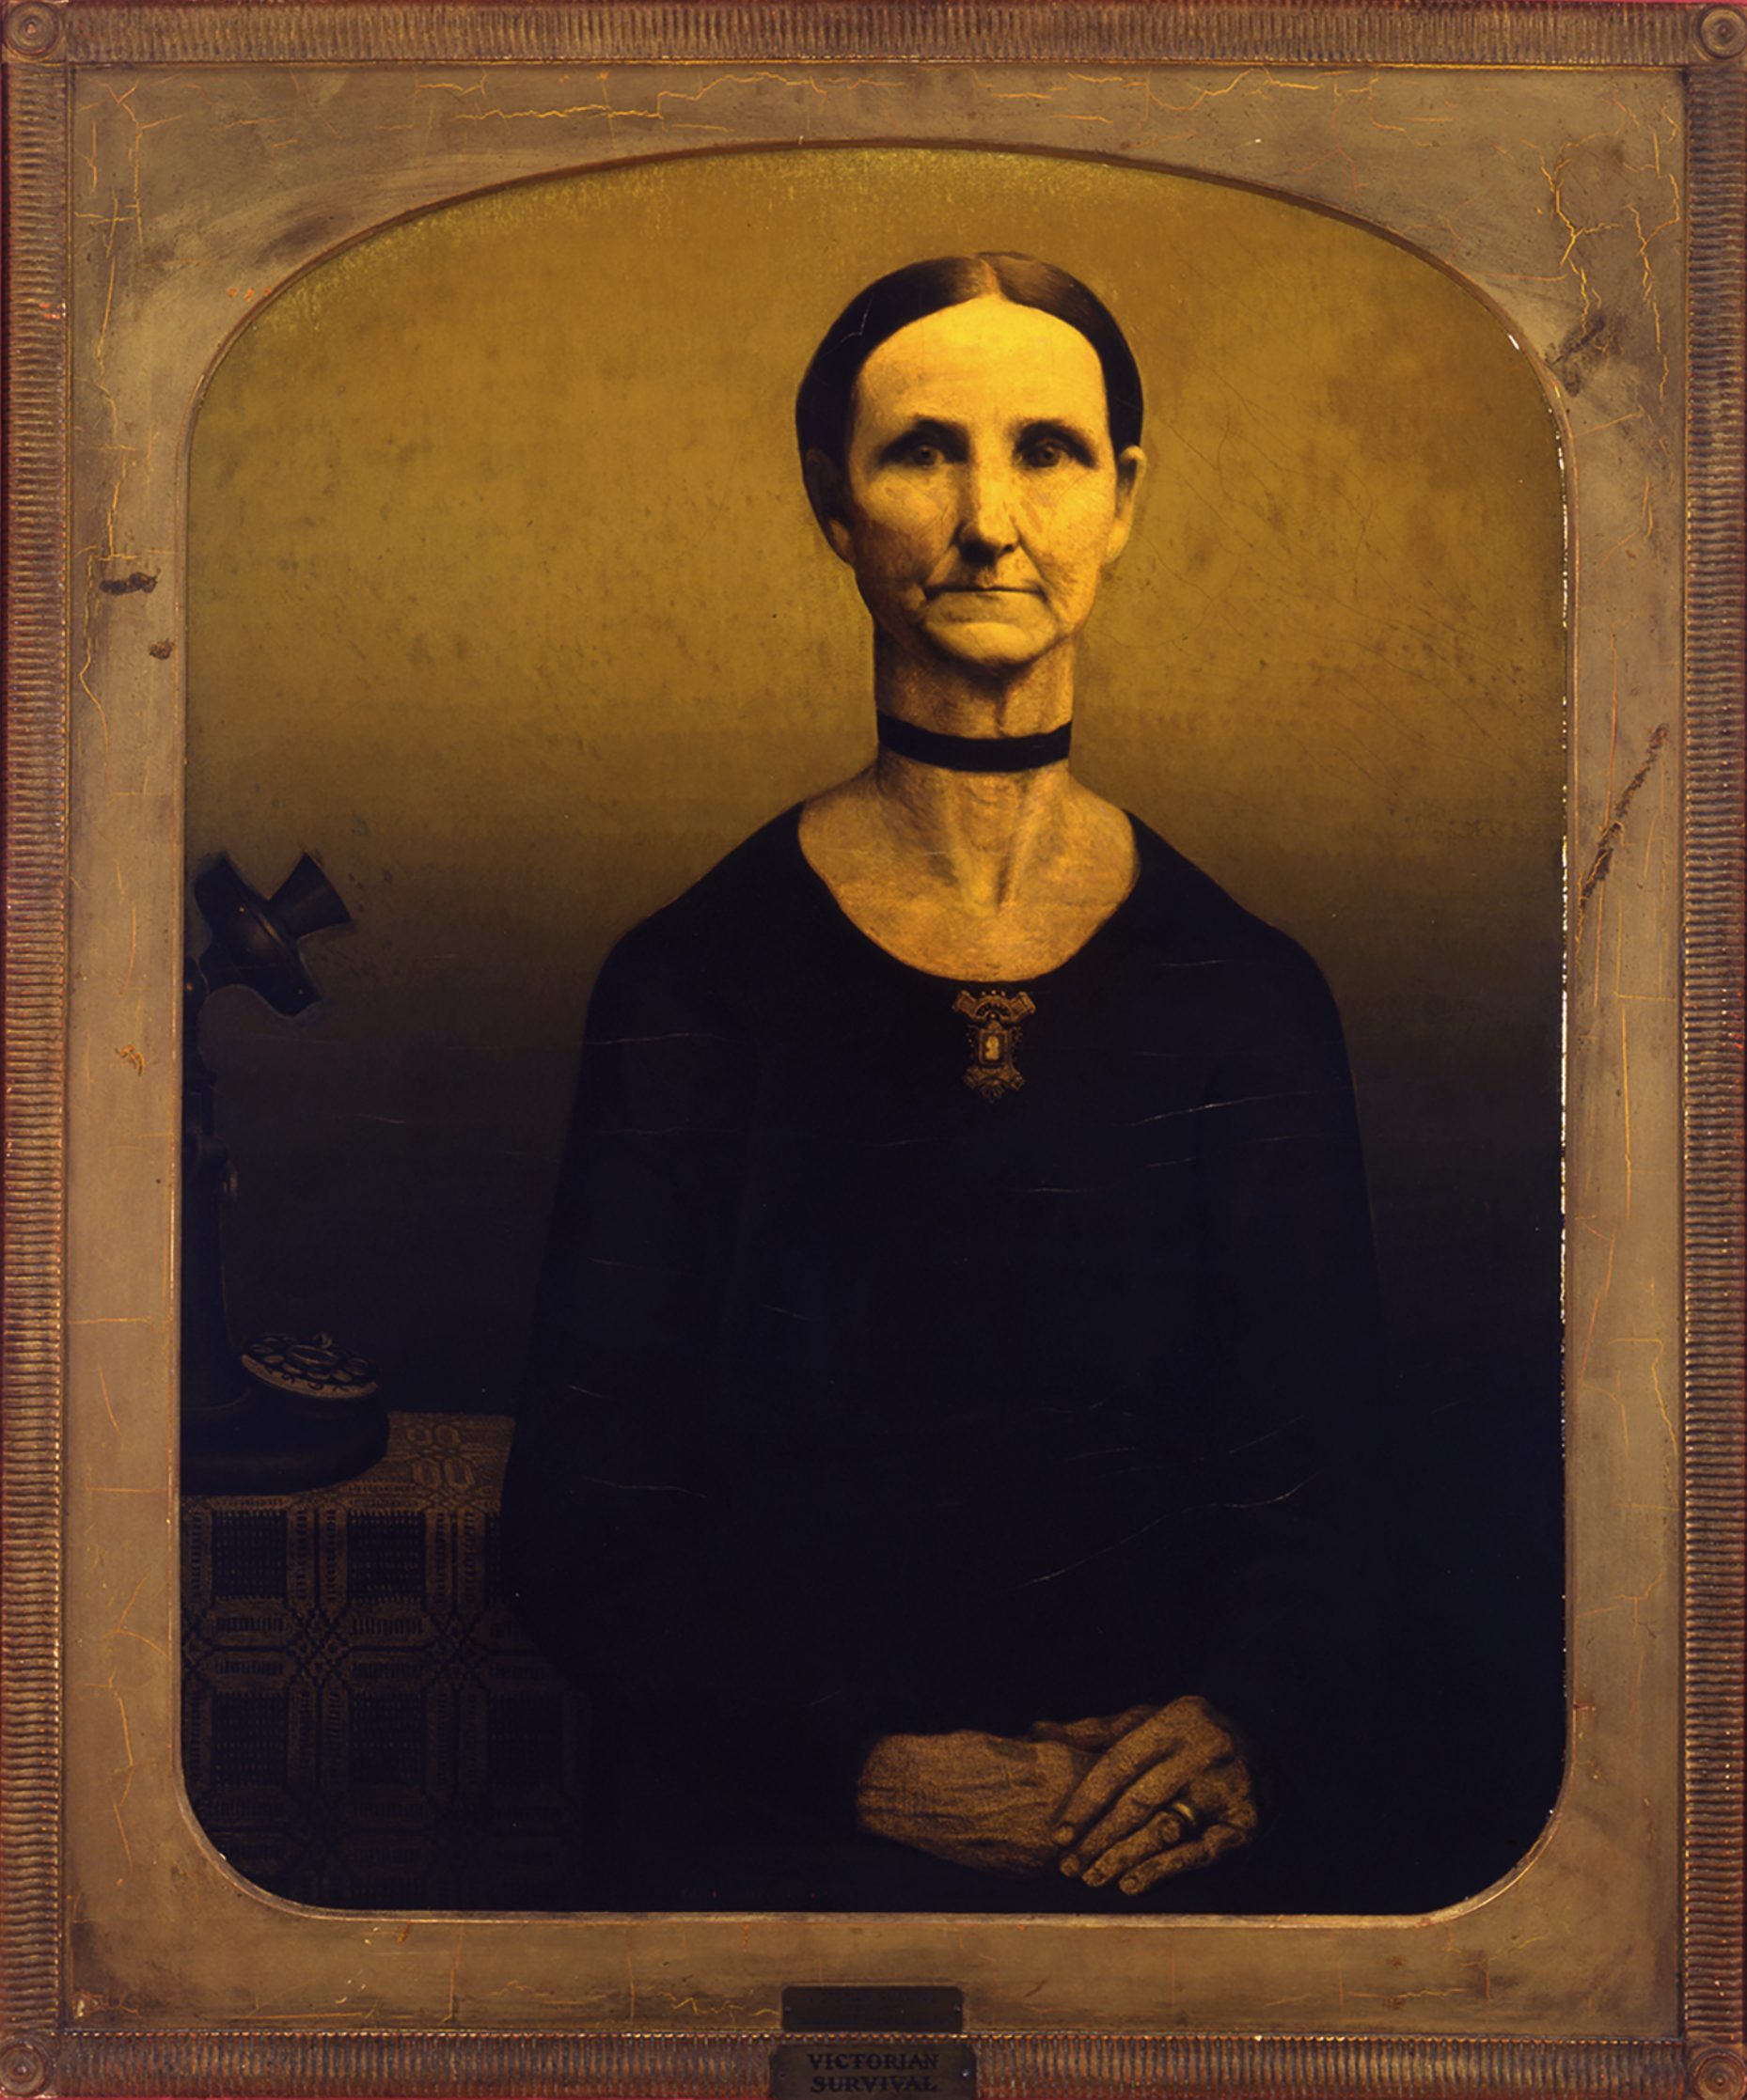 The painting depicts Wood's great aunt, Matilda Peet, as a stern figure in black Victorian attire, adorned with a brooch and a black neck band. The presence of an old-fashioned telephone offsets her slightly from the center of the composition, hinting at the intrusion of modernity into her quiet, traditional world. The impending ring of the phone threatens to disrupt her stoic composure, symbolizing the tension between the familiar past and the uncertain future. The painting encapsulates a narrative of change and adaptation in the face of modernity.